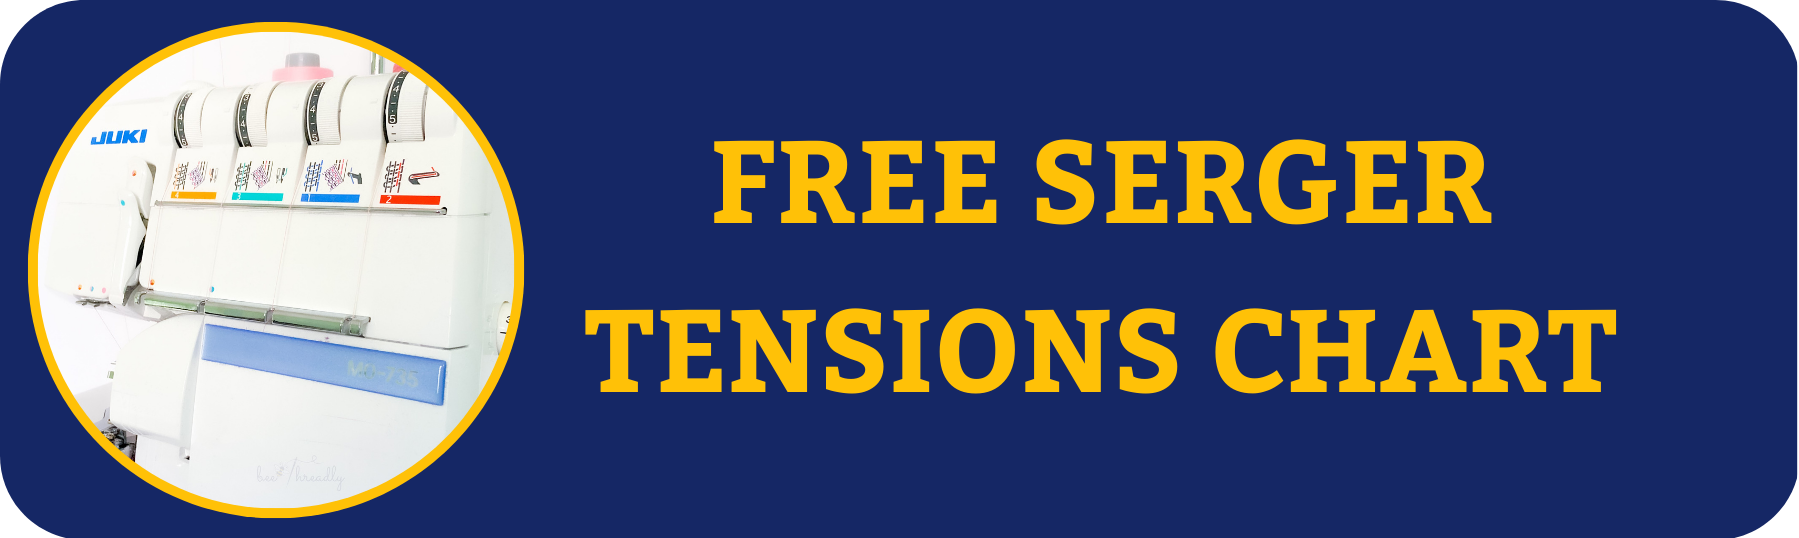 Free serger tensions chart